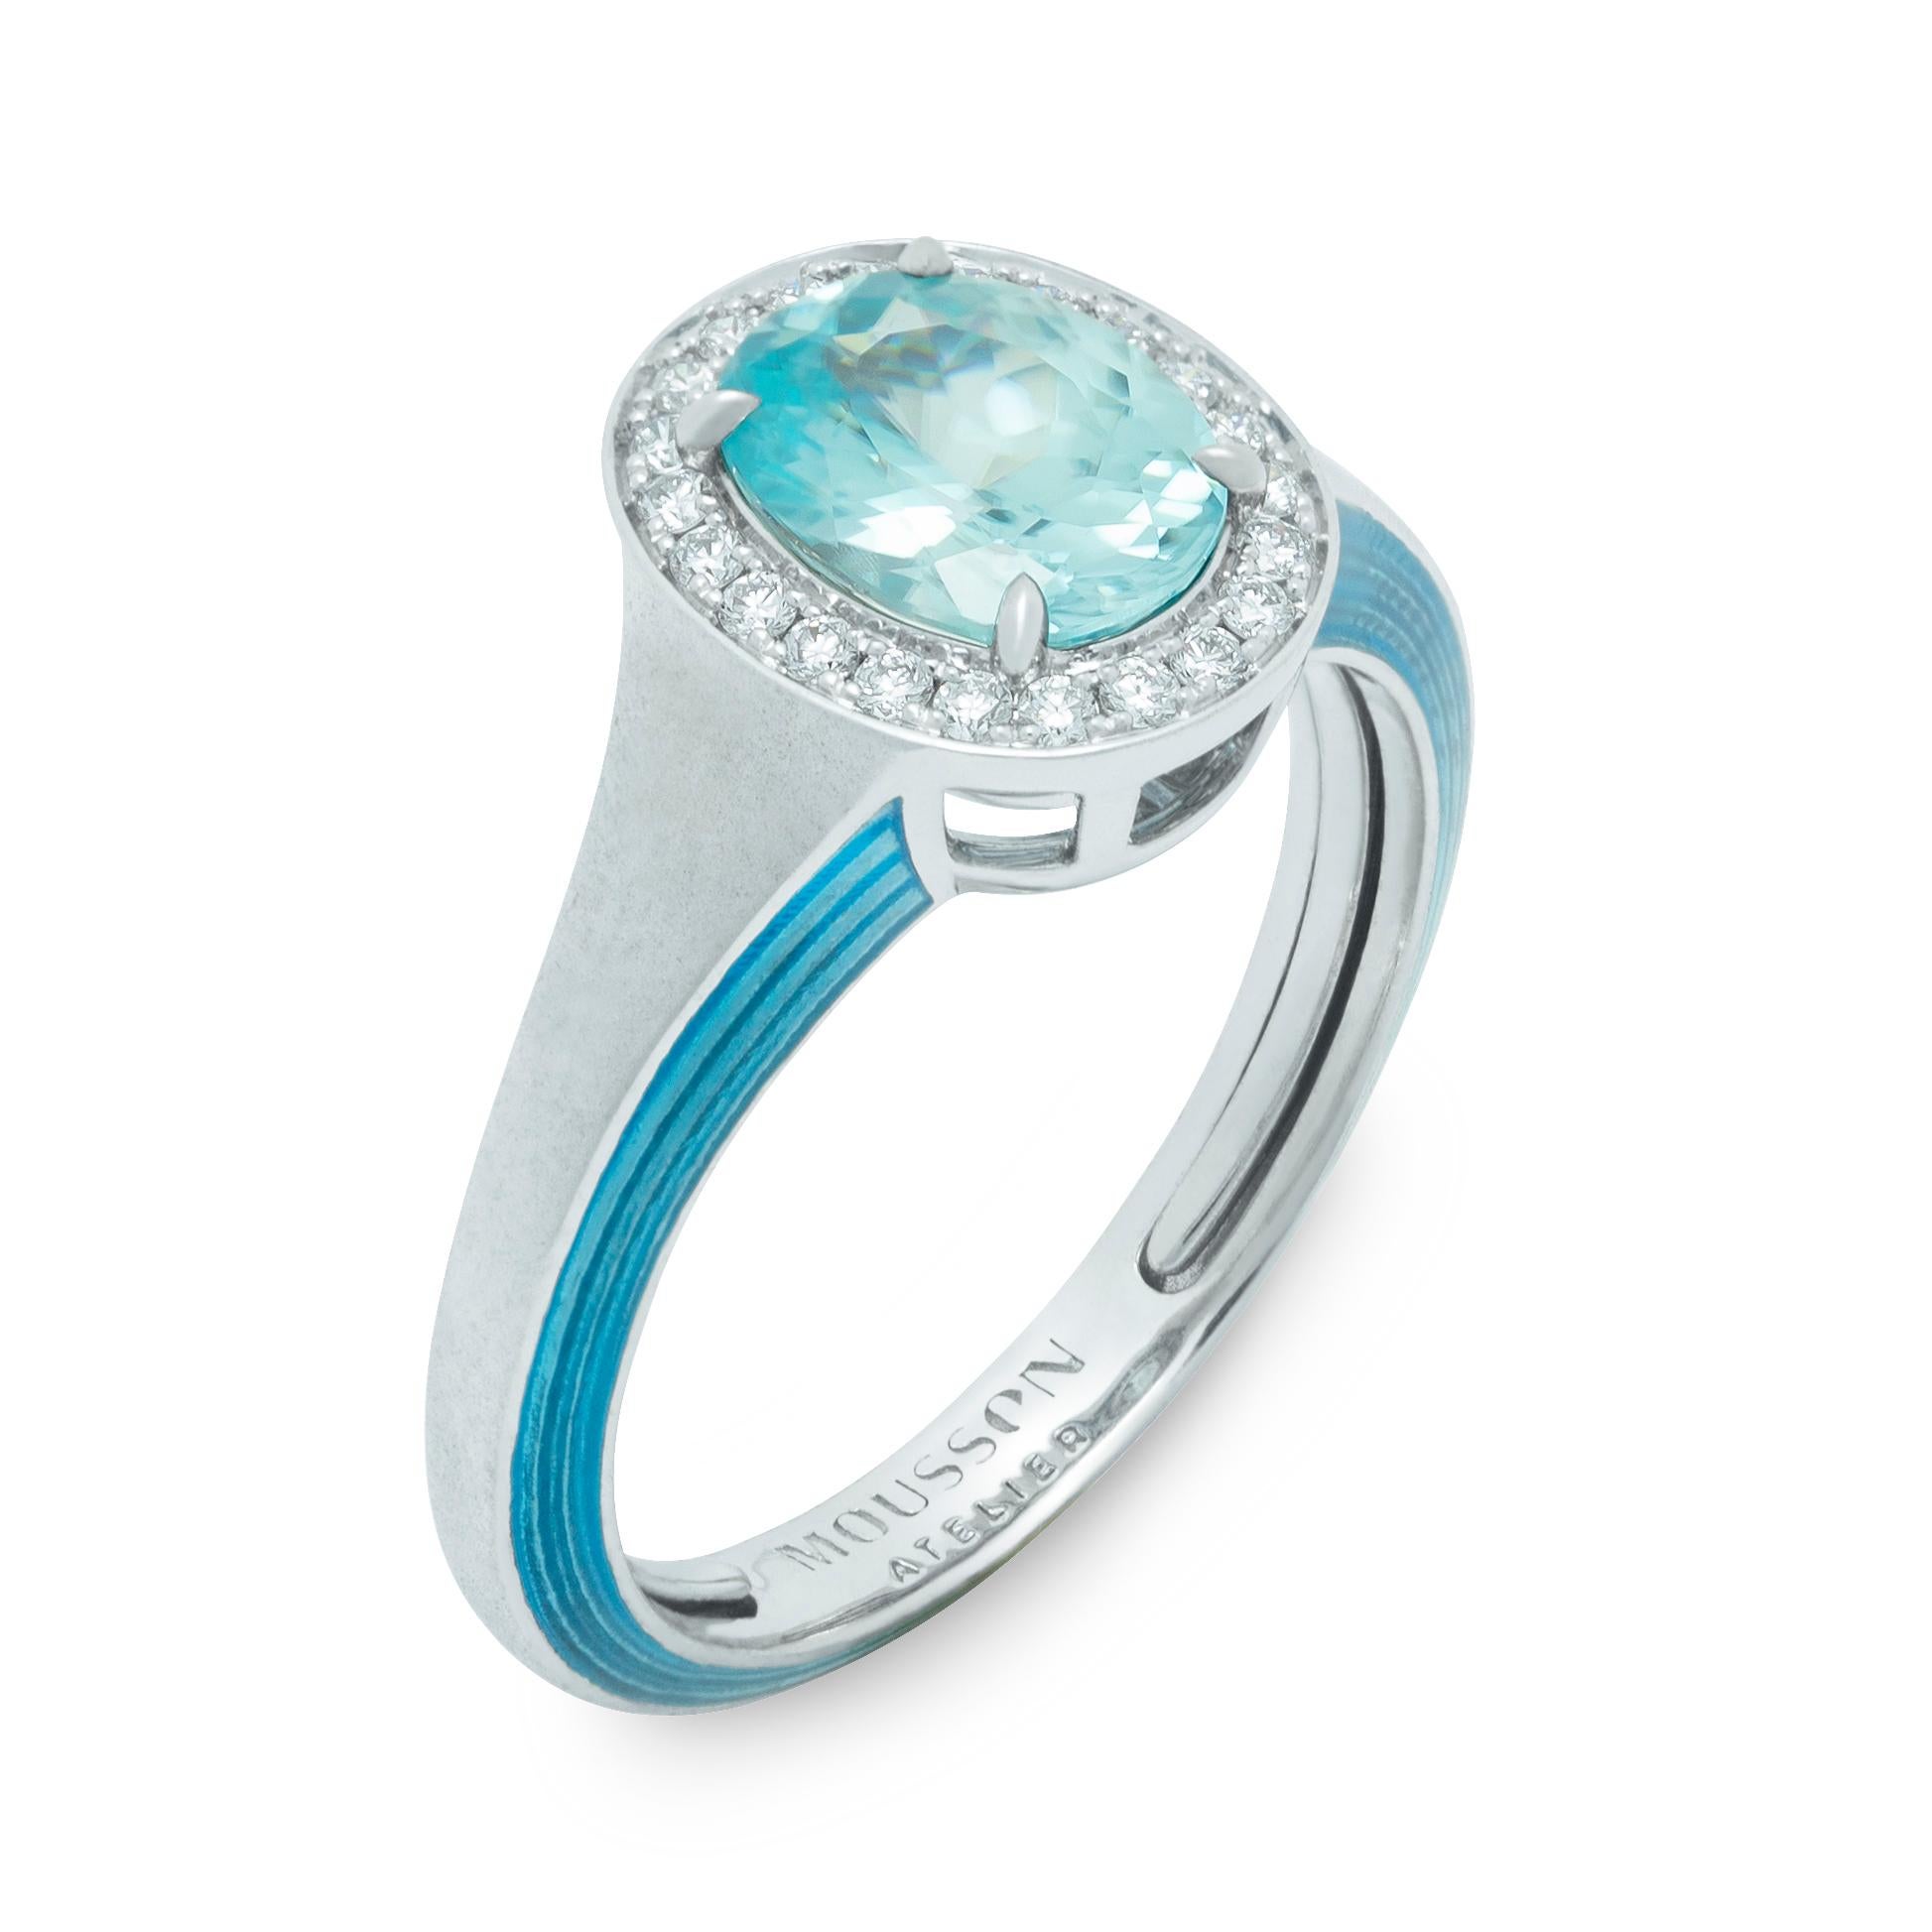 Blue Zircon 2.21 Carat Diamonds 18 Karat White Gold Enamel New Classic Ring
We have published a series of new Rings with the same idea but with different details. Introducing a Ring crafted from 18 Karat White Gold, which in a company with 2.21